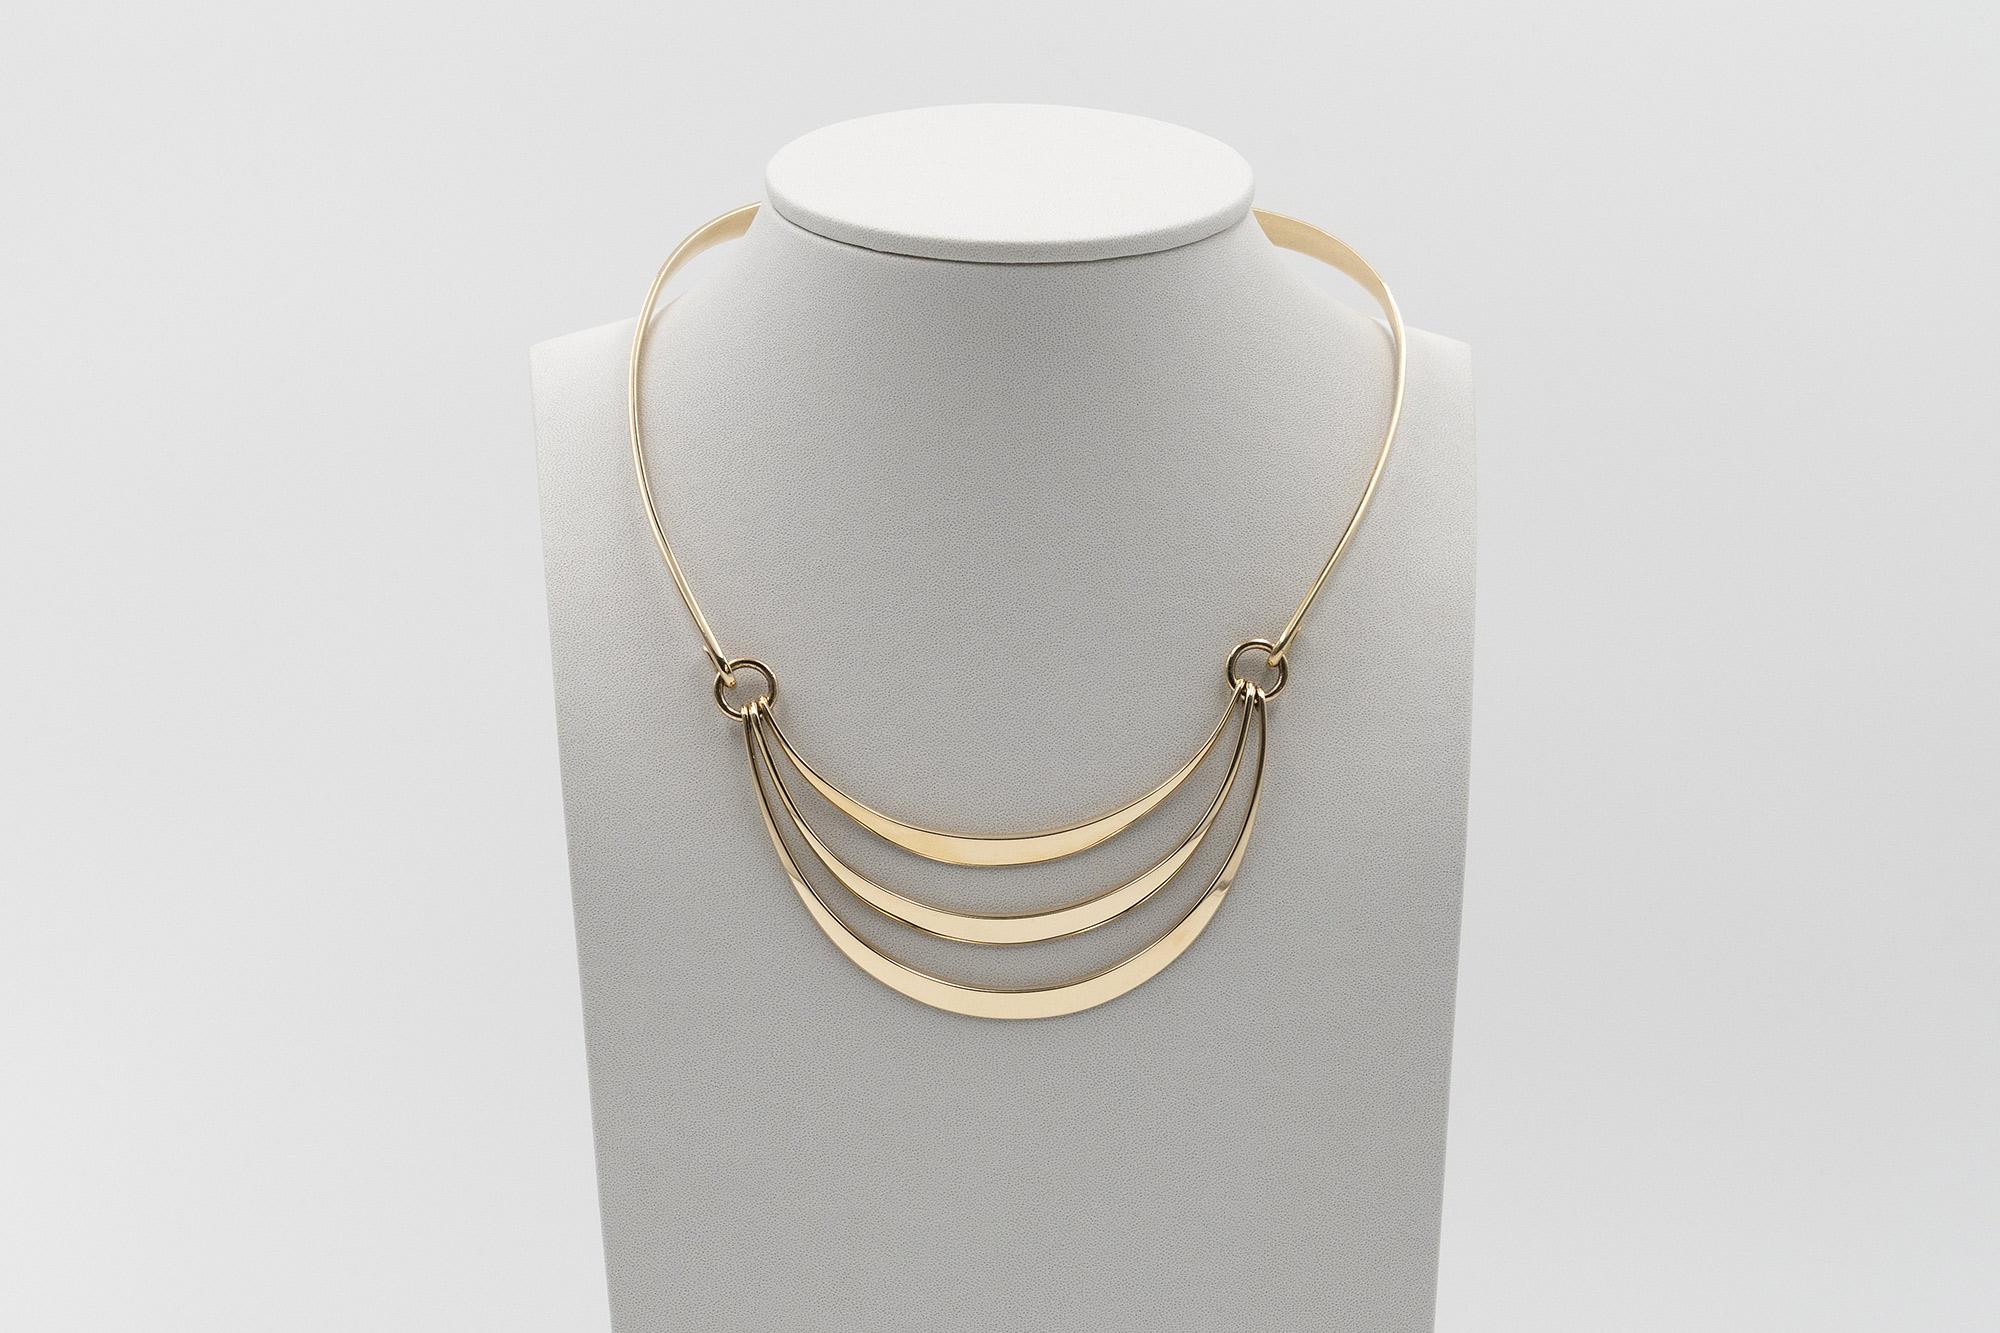 A  14ct gold openable rigid necklace with three articulated elements designed by Danish manufacture 